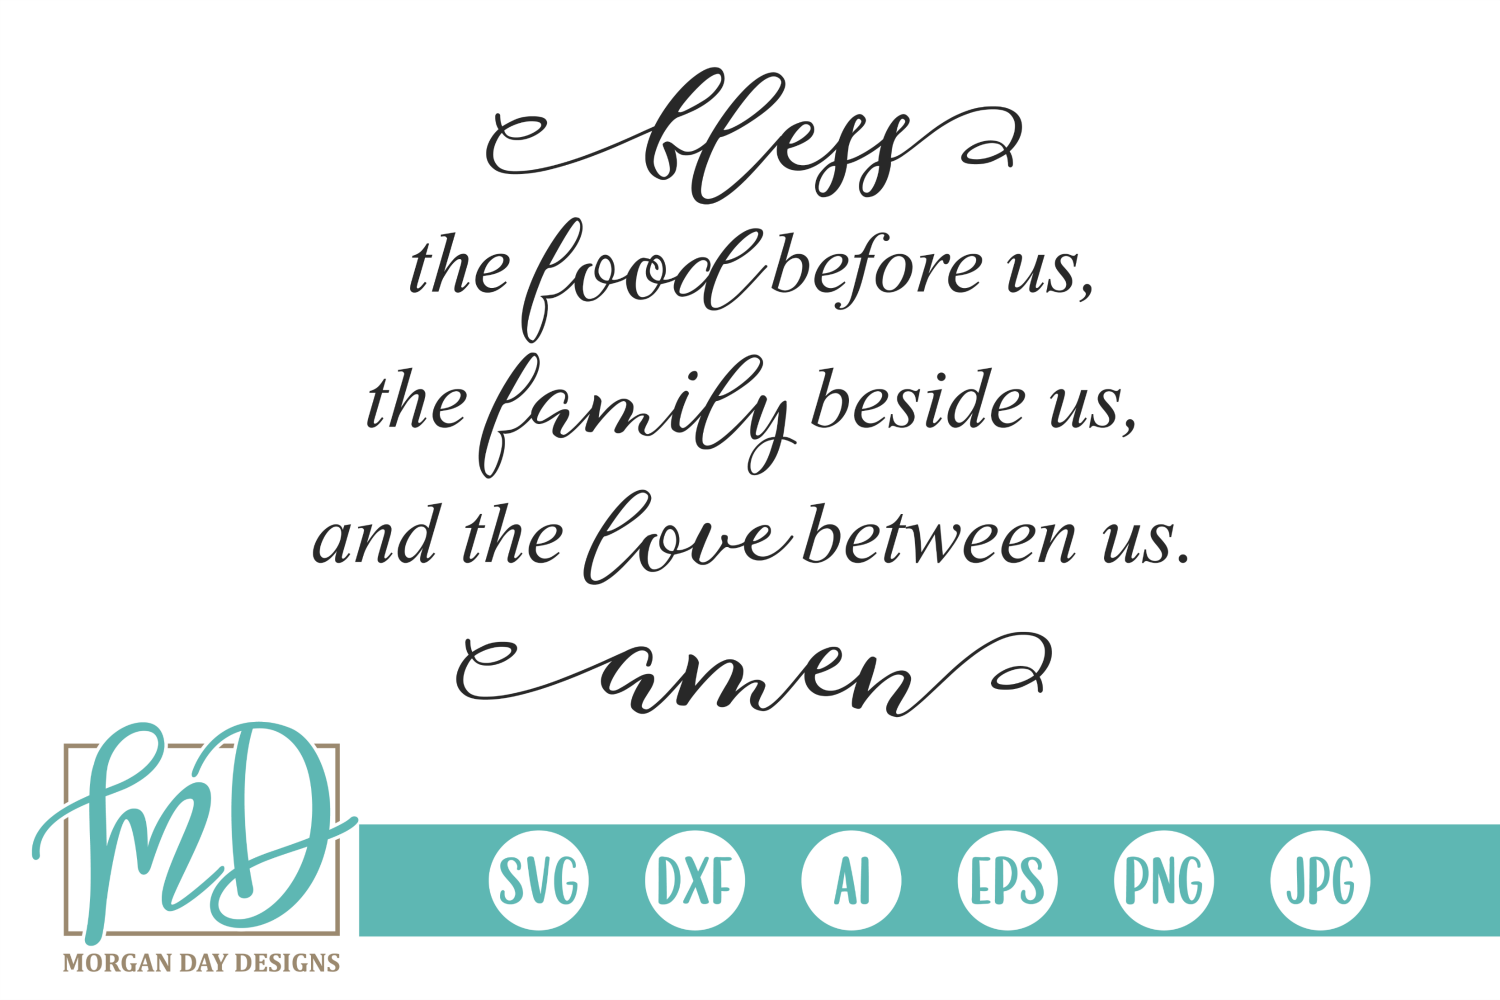 bless-the-food-before-us-sign-rustic-sign-family-sign-etsy